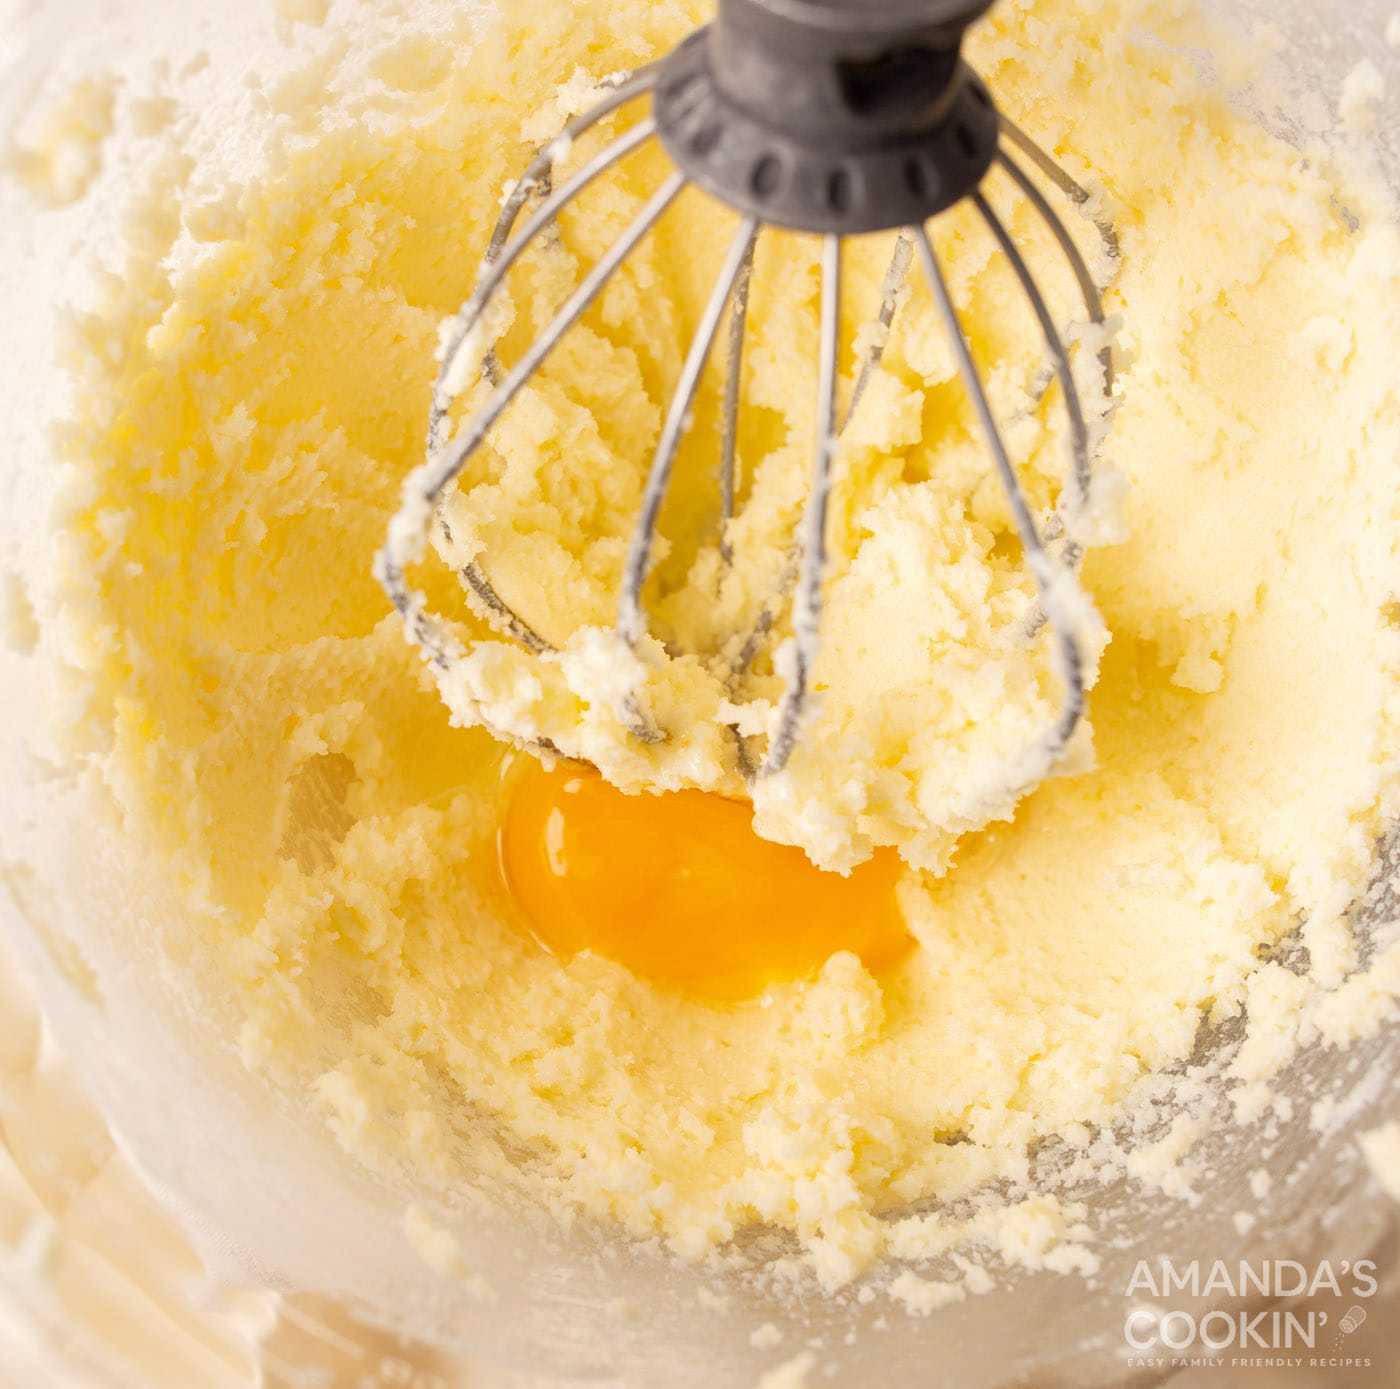 butter, sugar, egg, and almond extract in a mixer bowl